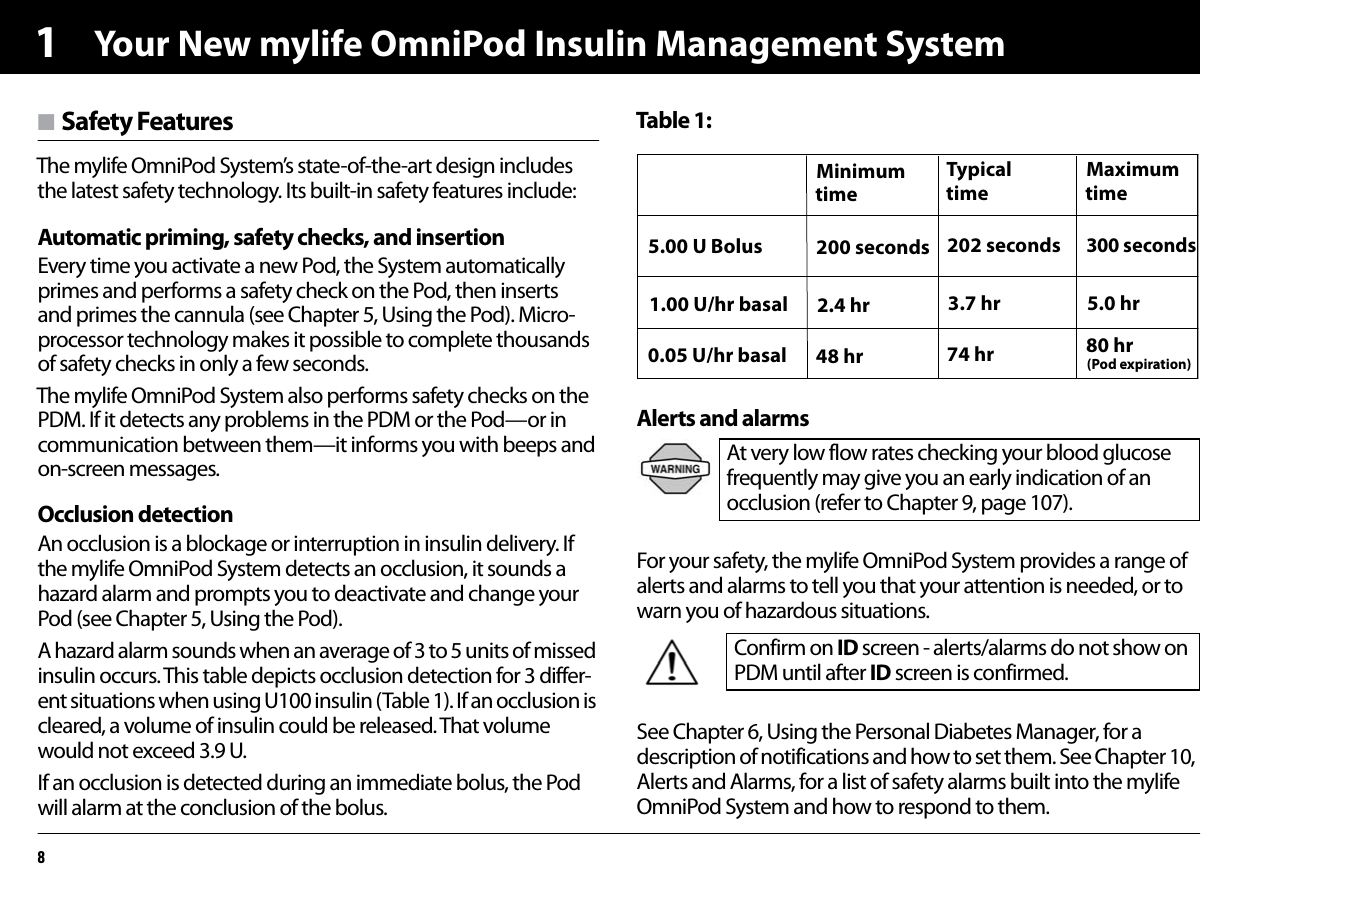 Your New mylife OmniPod Insulin Management System81n Safety FeaturesThe mylife OmniPod System’s state-of-the-art design includes the latest safety technology. Its built-in safety features include:Automatic priming, safety checks, and insertionEvery time you activate a new Pod, the System automatically primes and performs a safety check on the Pod, then inserts and primes the cannula (see Chapter 5, Using the Pod). Micro-processor technology makes it possible to complete thousands of safety checks in only a few seconds.The mylife OmniPod System also performs safety checks on the PDM. If it detects any problems in the PDM or the Pod—or in communication between them—it informs you with beeps and on-screen messages.Occlusion detectionAn occlusion is a blockage or interruption in insulin delivery. Ifthe mylife OmniPod System detects an occlusion, it sounds ahazard alarm and prompts you to deactivate and change your Pod (see Chapter 5, Using the Pod).A hazard alarm sounds when an average of 3 to 5 units of missed insulin occurs. This table depicts occlusion detection for 3 differ-ent situations when using U100 insulin (Table 1). If an occlusion is cleared, a volume of insulin could be released. That volume would not exceed 3.9 U. If an occlusion is detected during an immediate bolus, the Pod will alarm at the conclusion of the bolus. Table 1:Alerts and alarmsFor your safety, the mylife OmniPod System provides a range of alerts and alarms to tell you that your attention is needed, or to warn you of hazardous situations.See Chapter 6, Using the Personal Diabetes Manager, for a description of notifications and how to set them. See Chapter 10, Alerts and Alarms, for a list of safety alarms built into the mylife OmniPod System and how to respond to them.At very low flow rates checking your blood glucosefrequently may give you an early indication of anocclusion (refer to Chapter 9, page 107).Confirm on ID screen - alerts/alarms do not show on PDM until after ID screen is confirmed.5.00 U Bolus1.00 U/hr basal0.05 U/hr basal200 seconds2.4 hr48 hrMinimumtime202 seconds3.7 hr74 hrTypicaltime300 seconds5.0 hr80 hrMaximumtime(Pod expiration)